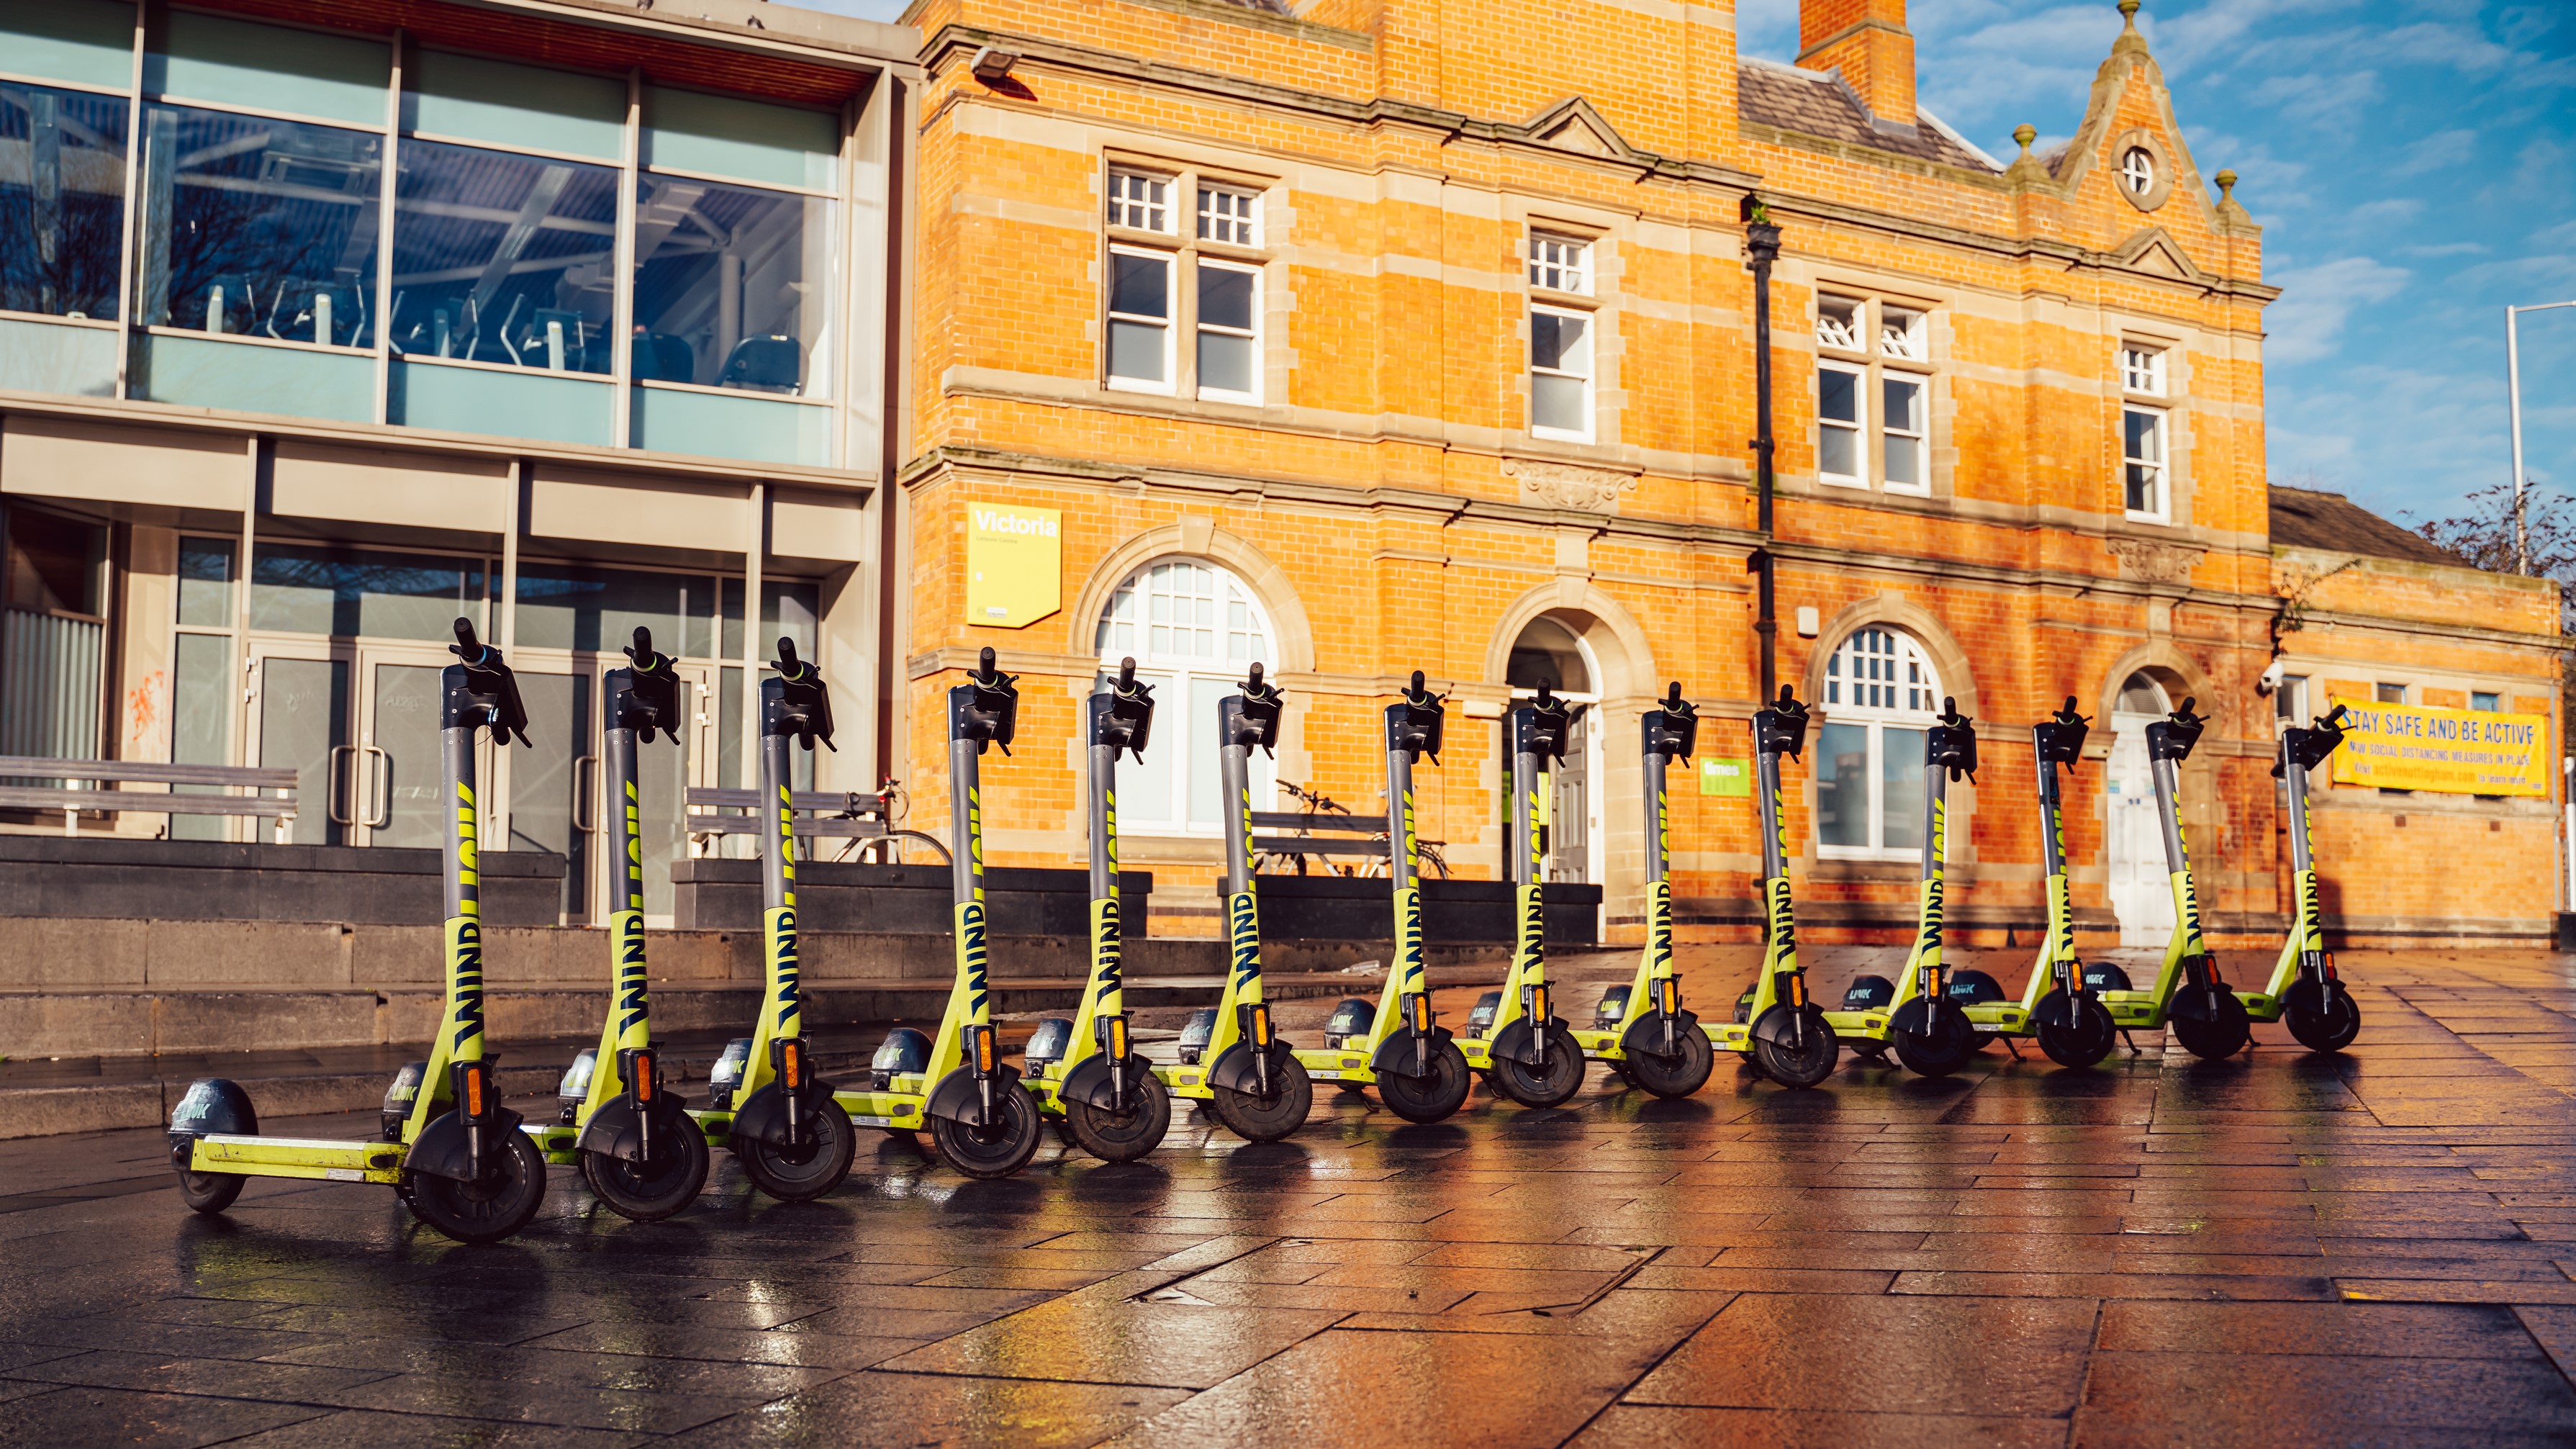 14 Superpedestrian LINK e-scooters standing in a row